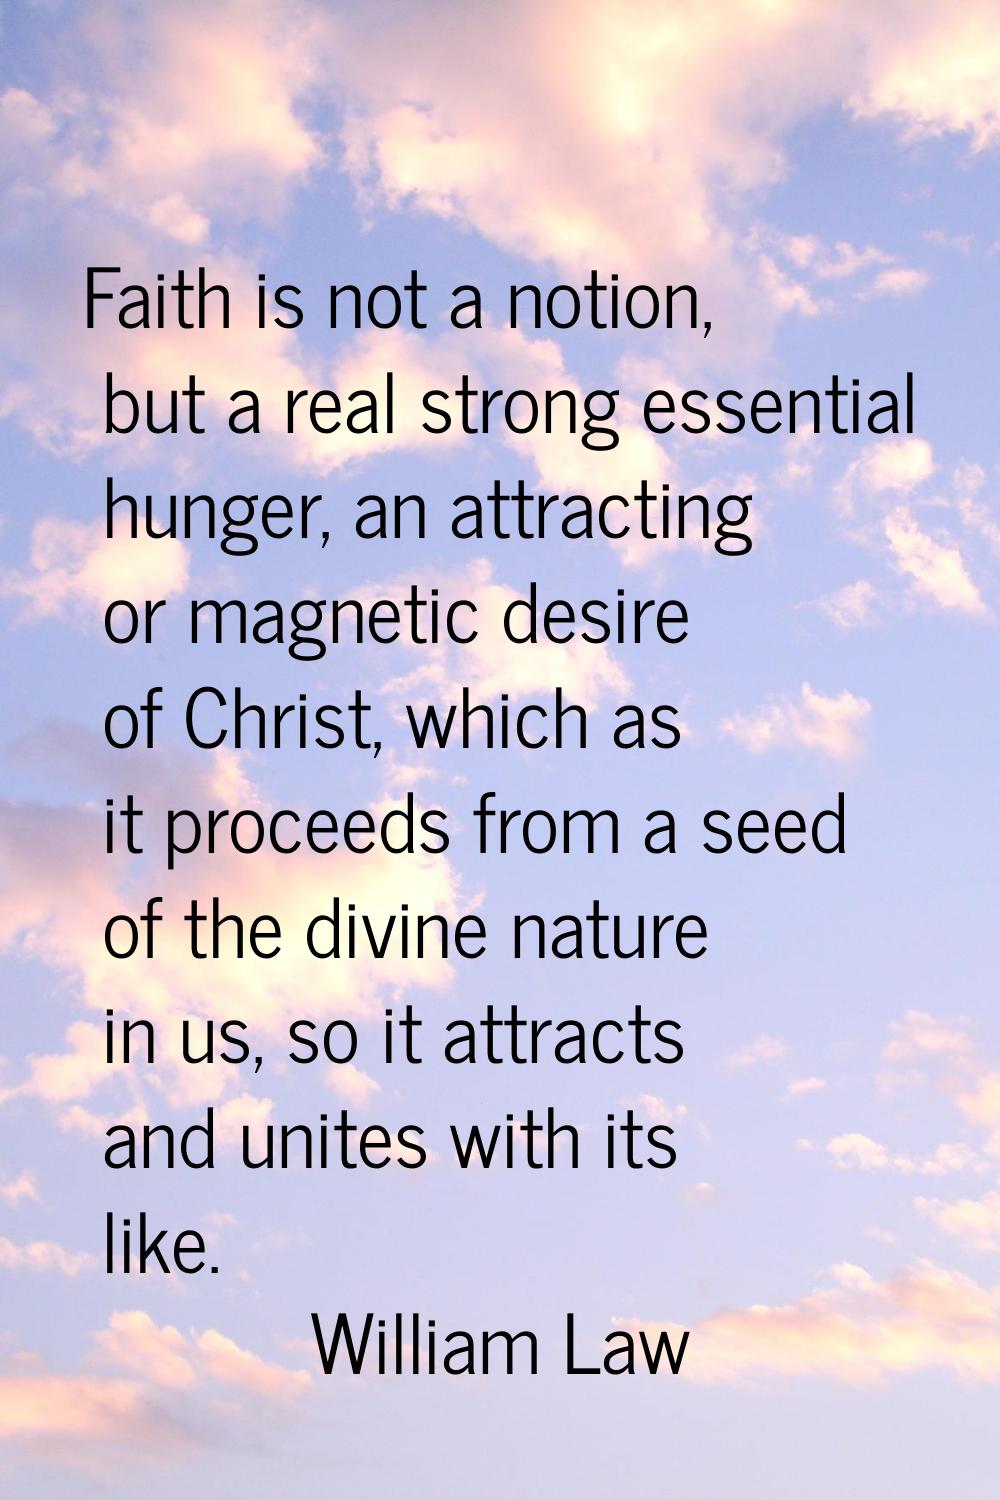 Faith is not a notion, but a real strong essential hunger, an attracting or magnetic desire of Chri